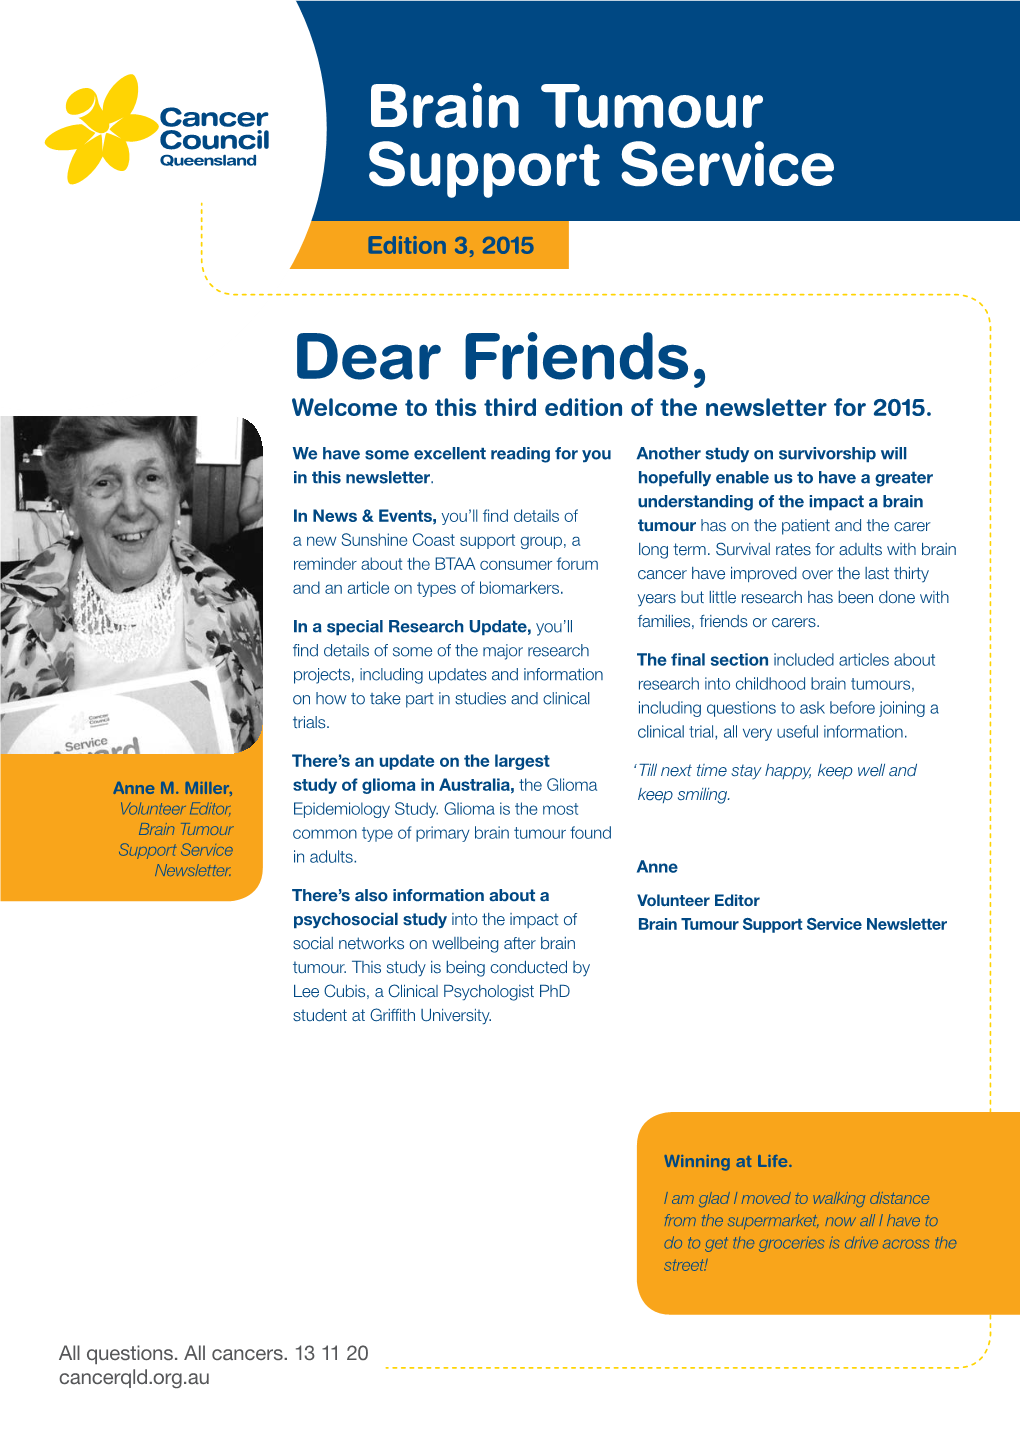 Dear Friends, Welcome to This Third Edition of the Newsletter for 2015